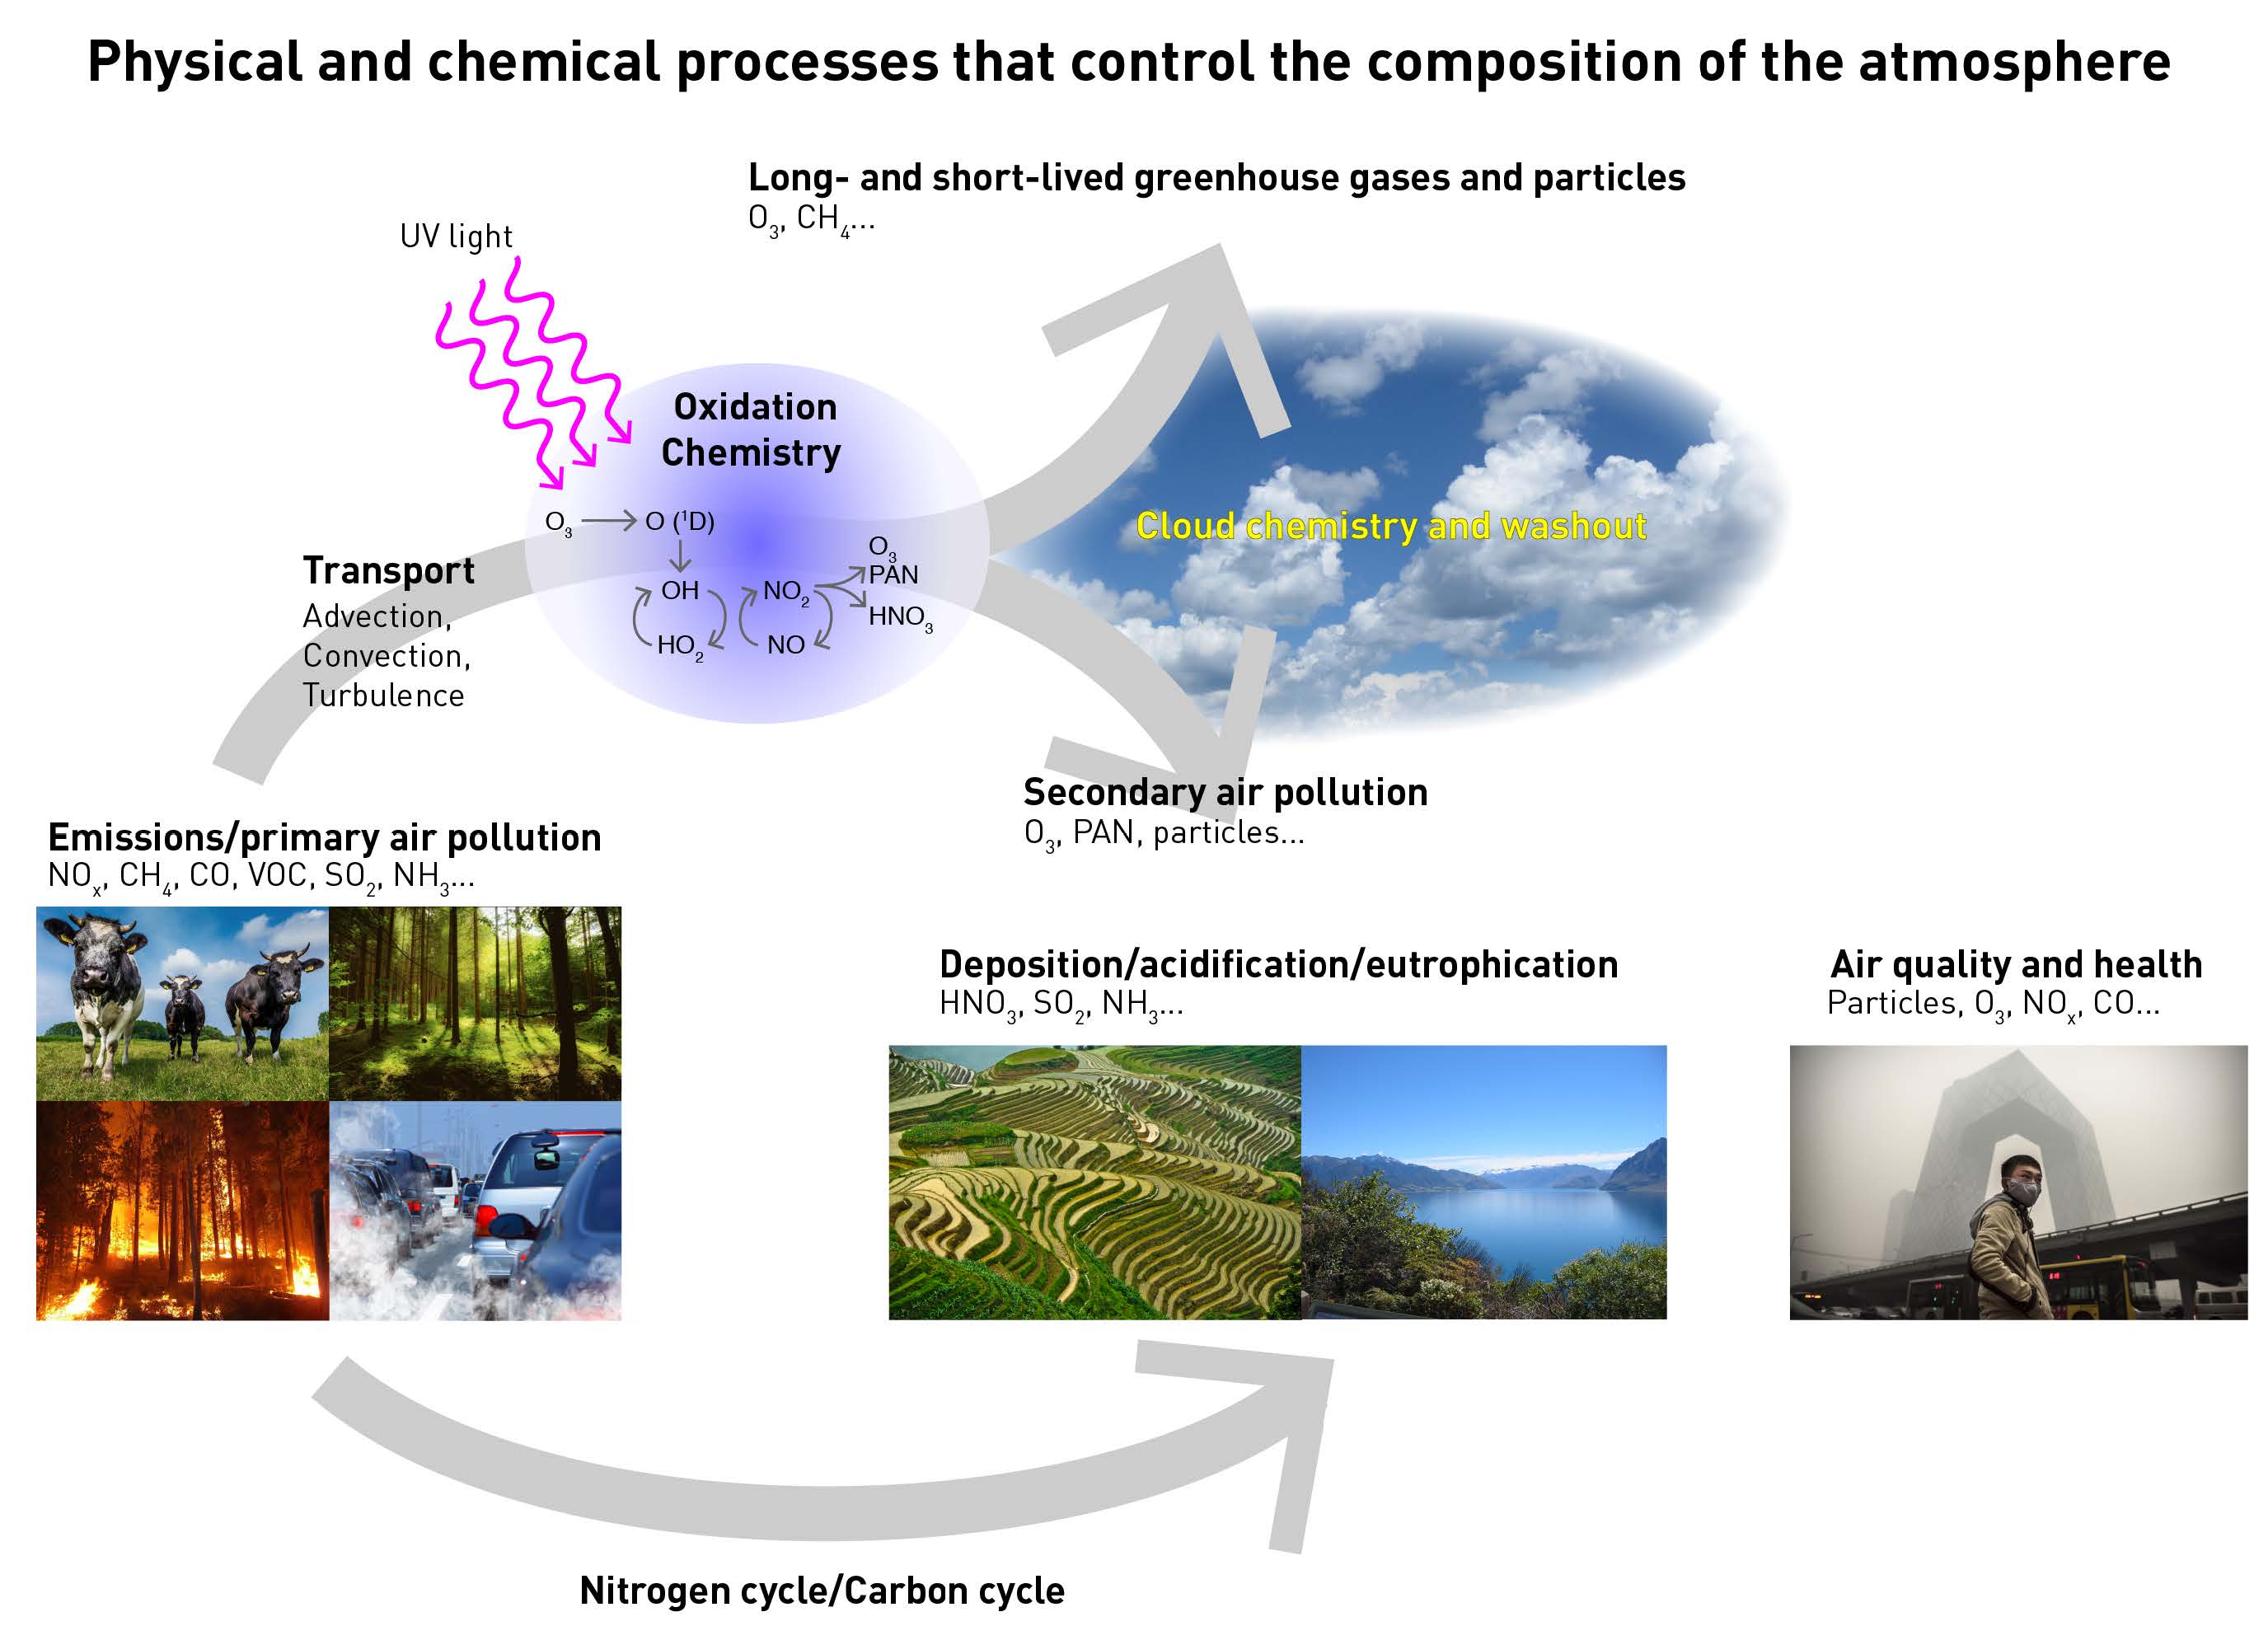 Physical and chemical processes that control the composition of the atmosphere on different scales